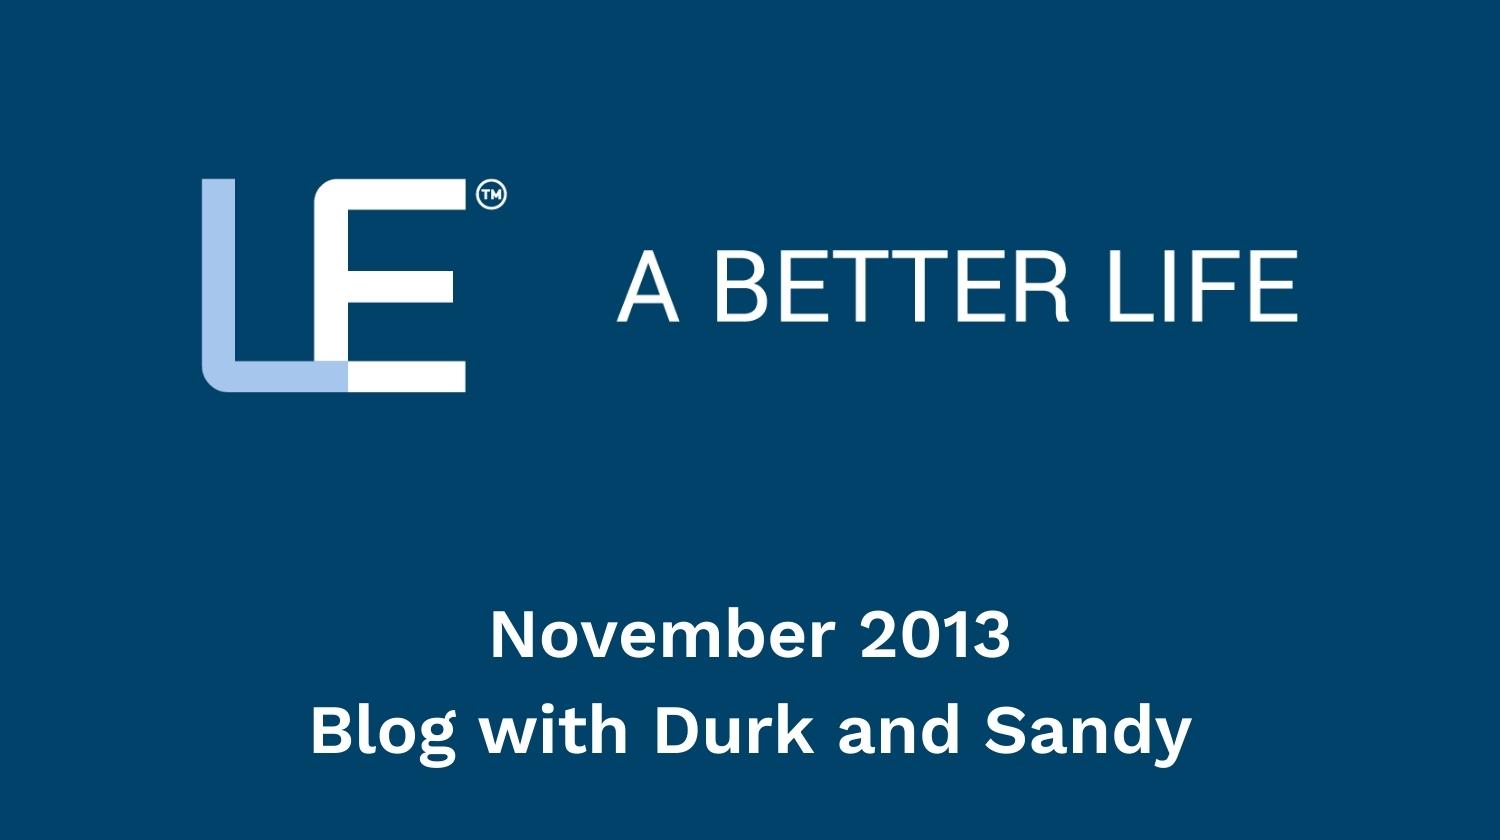 November 2013 Blog with Durk and Sandy